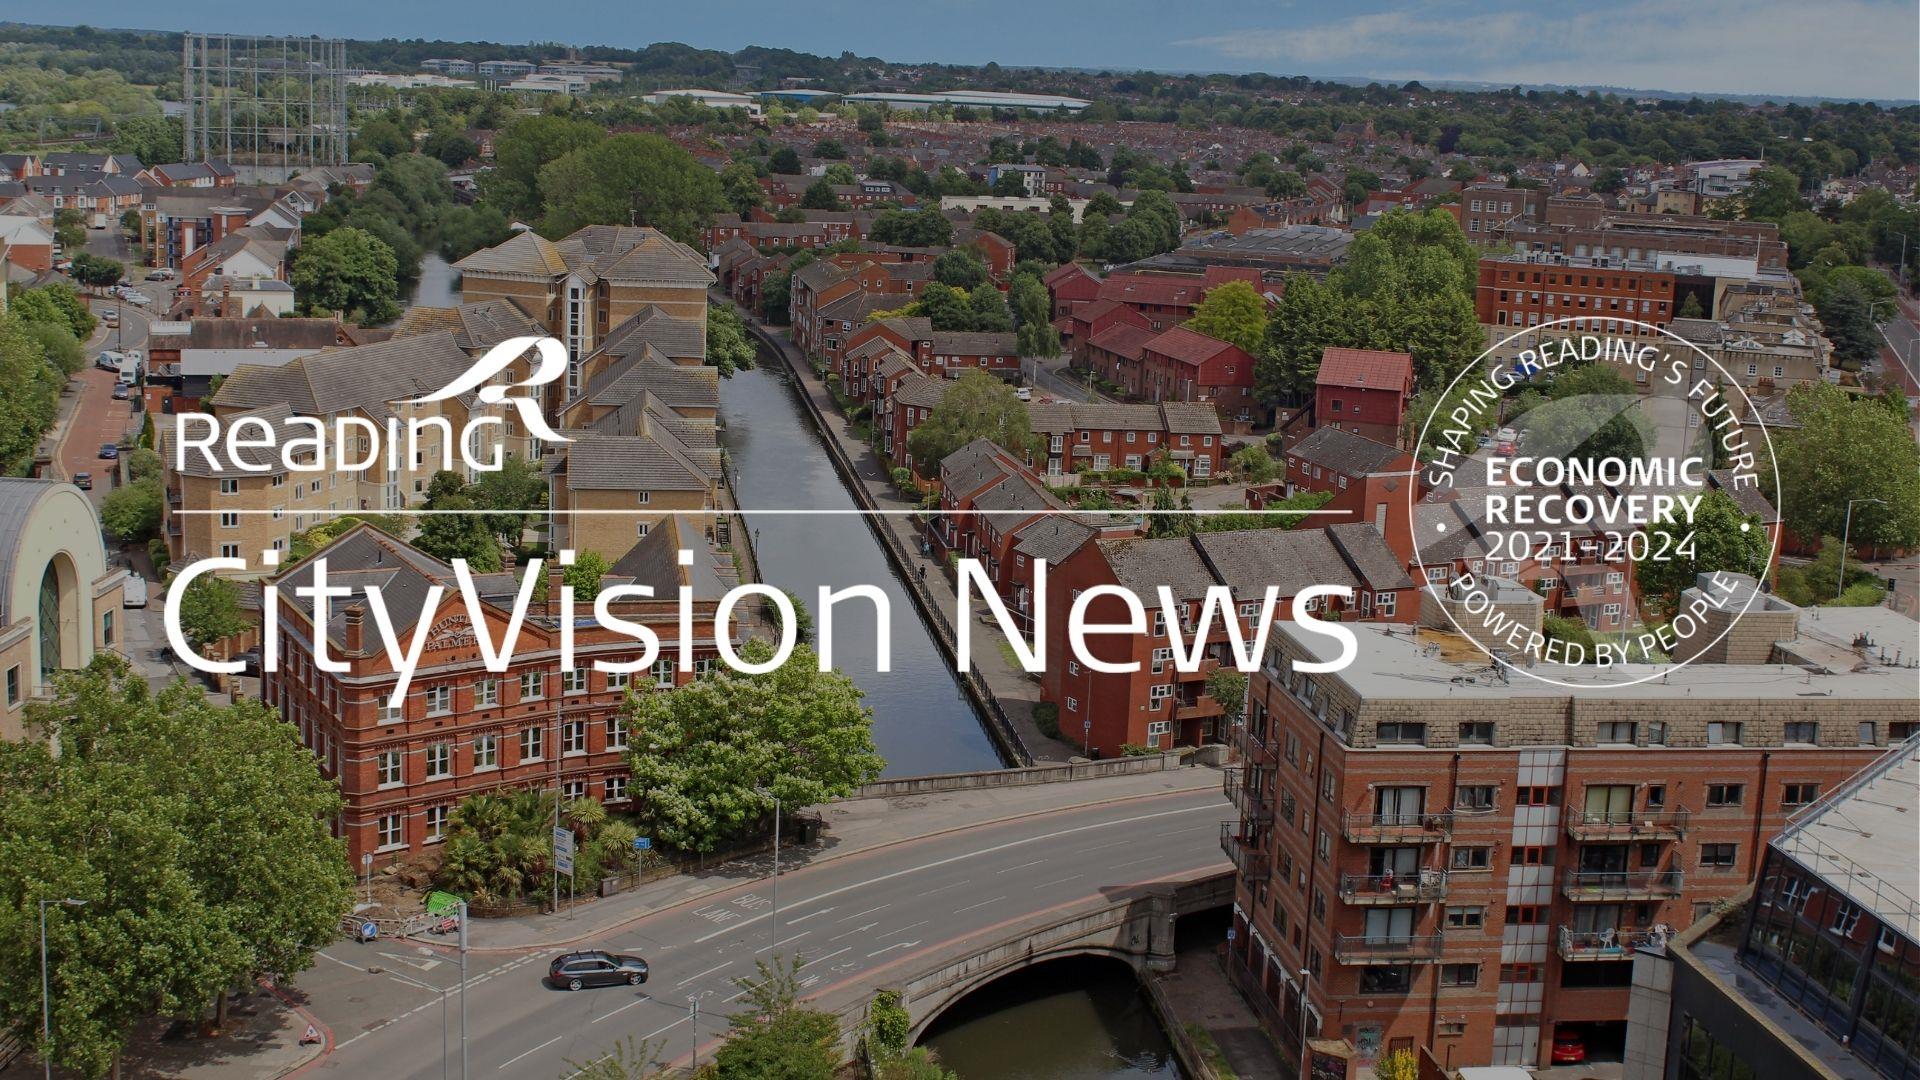 Aerial view of Reading centre with City Vision News logo